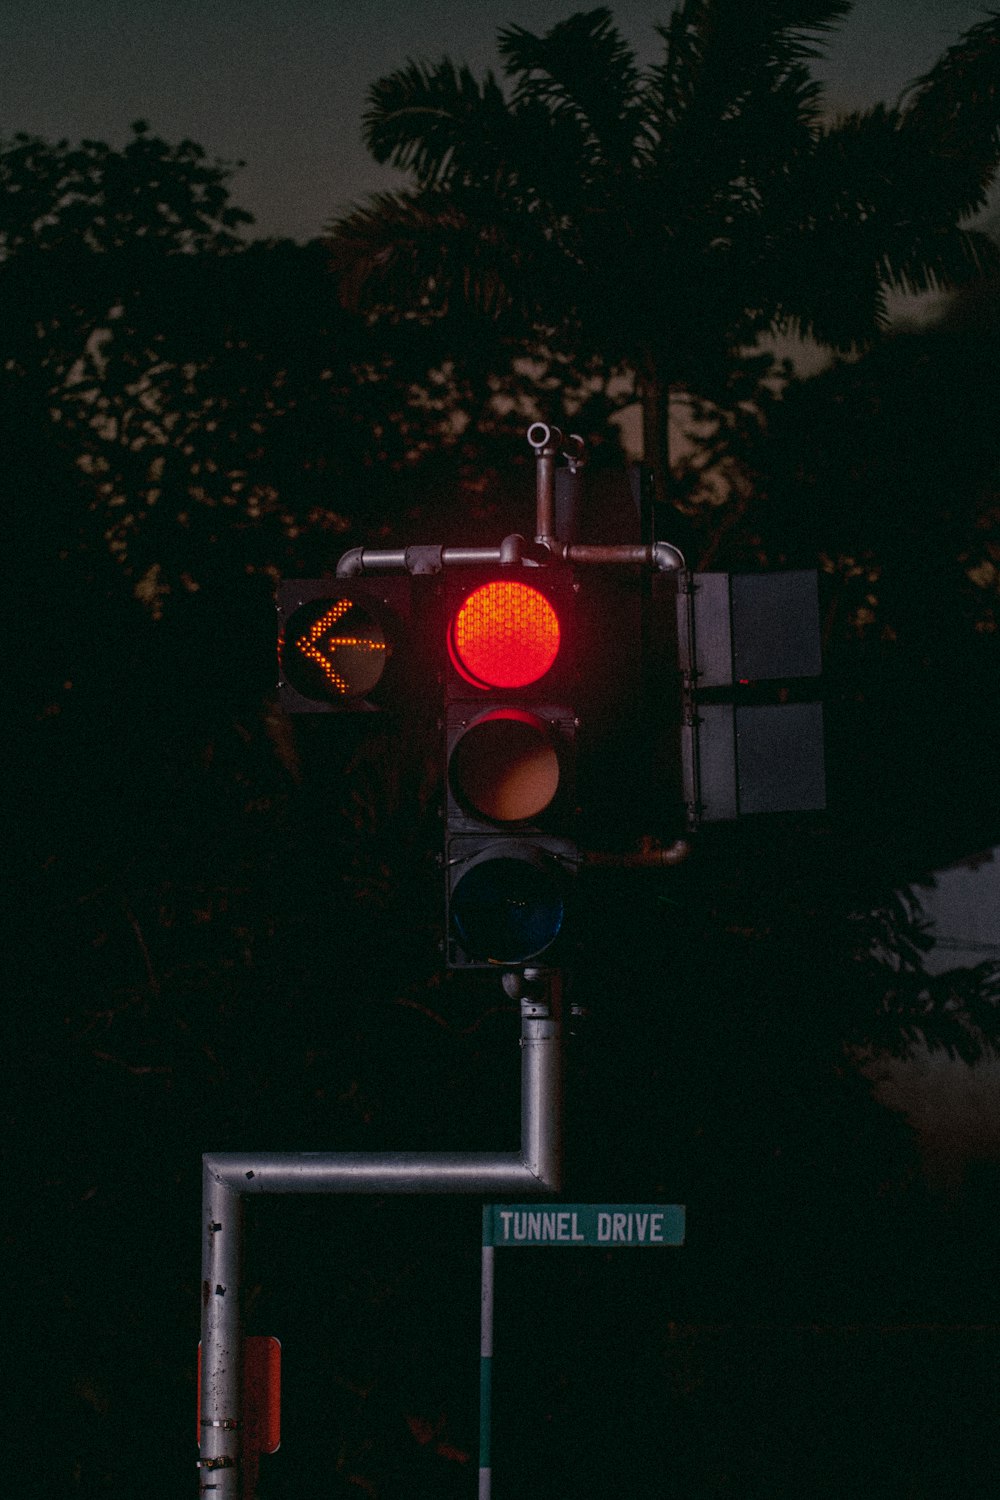 a traffic light with a red light on it